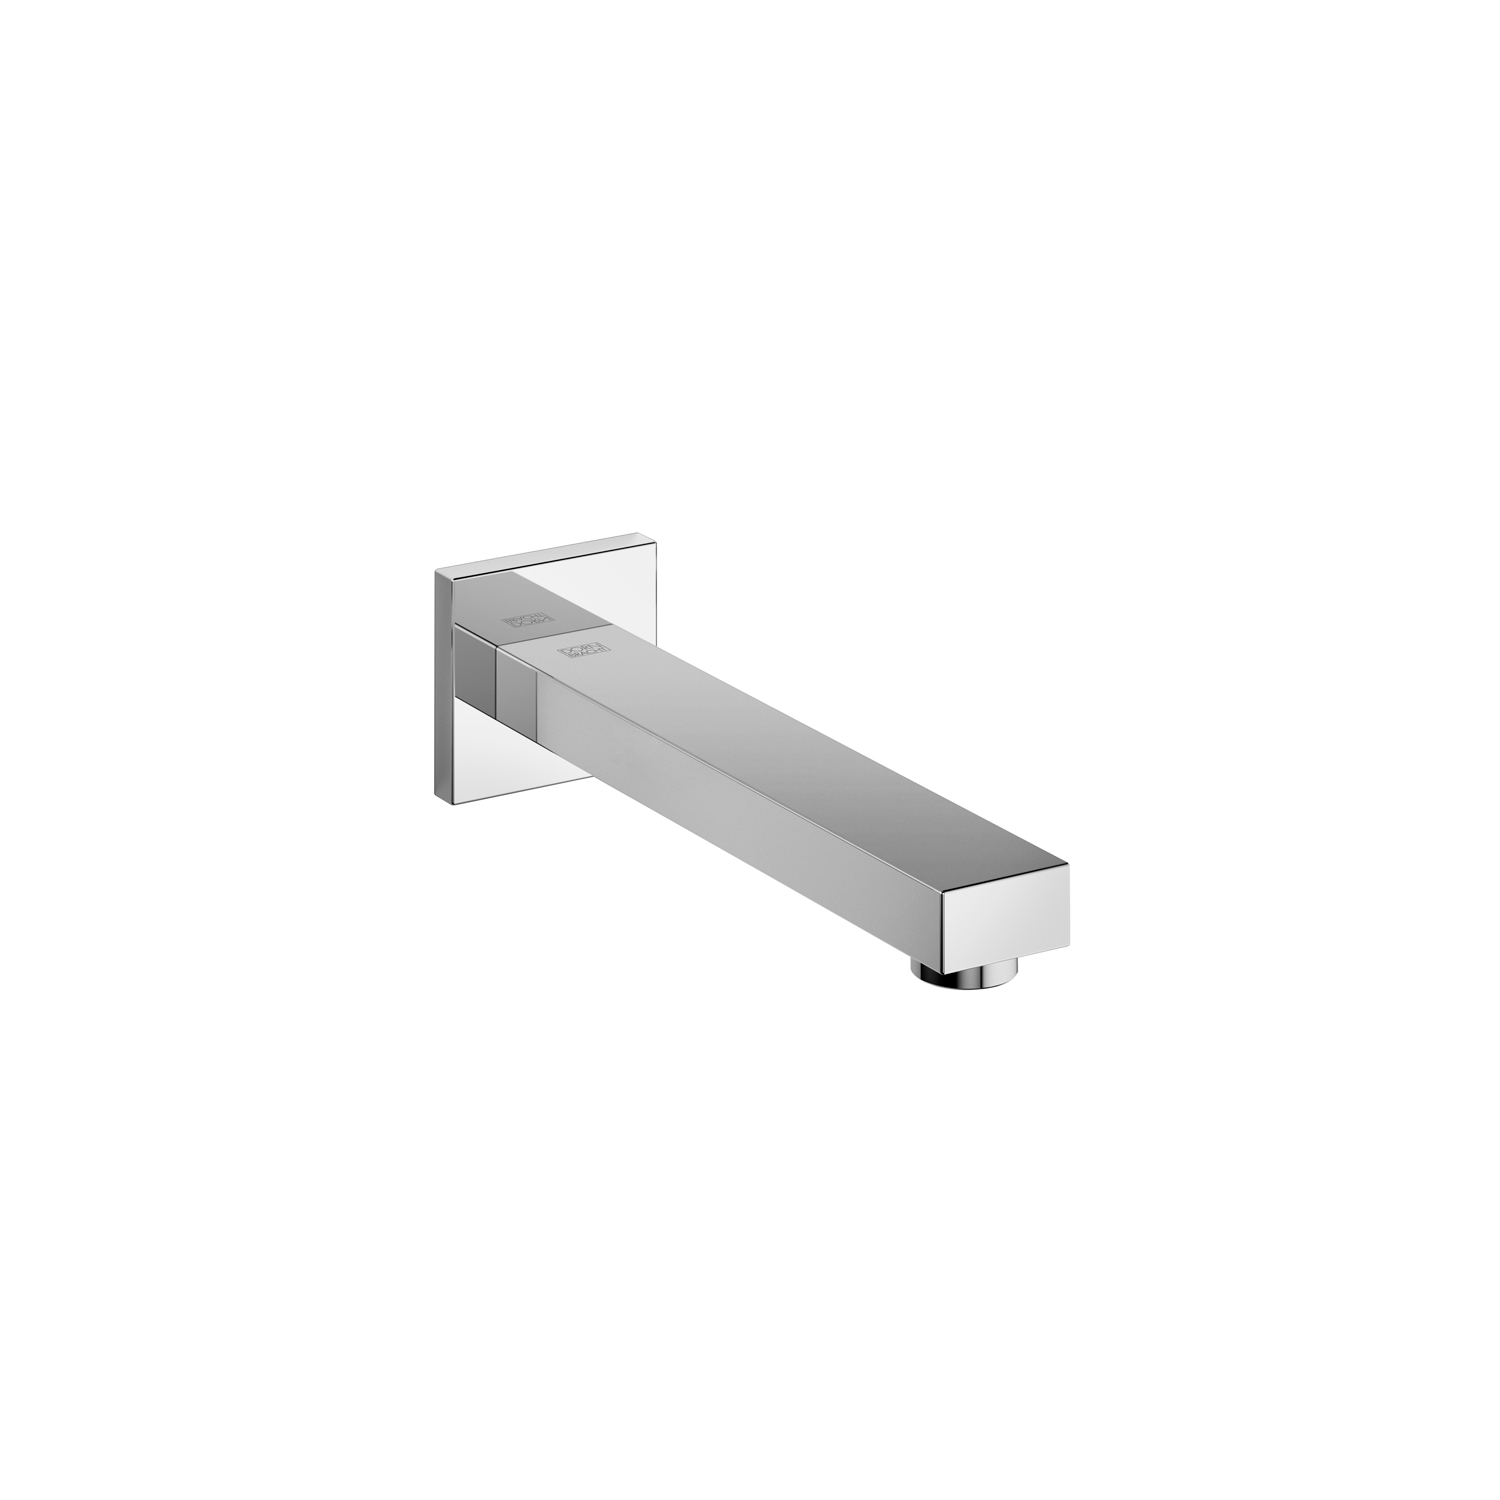 Picture of DORNBRACHT SYMETRICS Wall-mounted basin spout without pop-up waste - Chrome #13800980-00